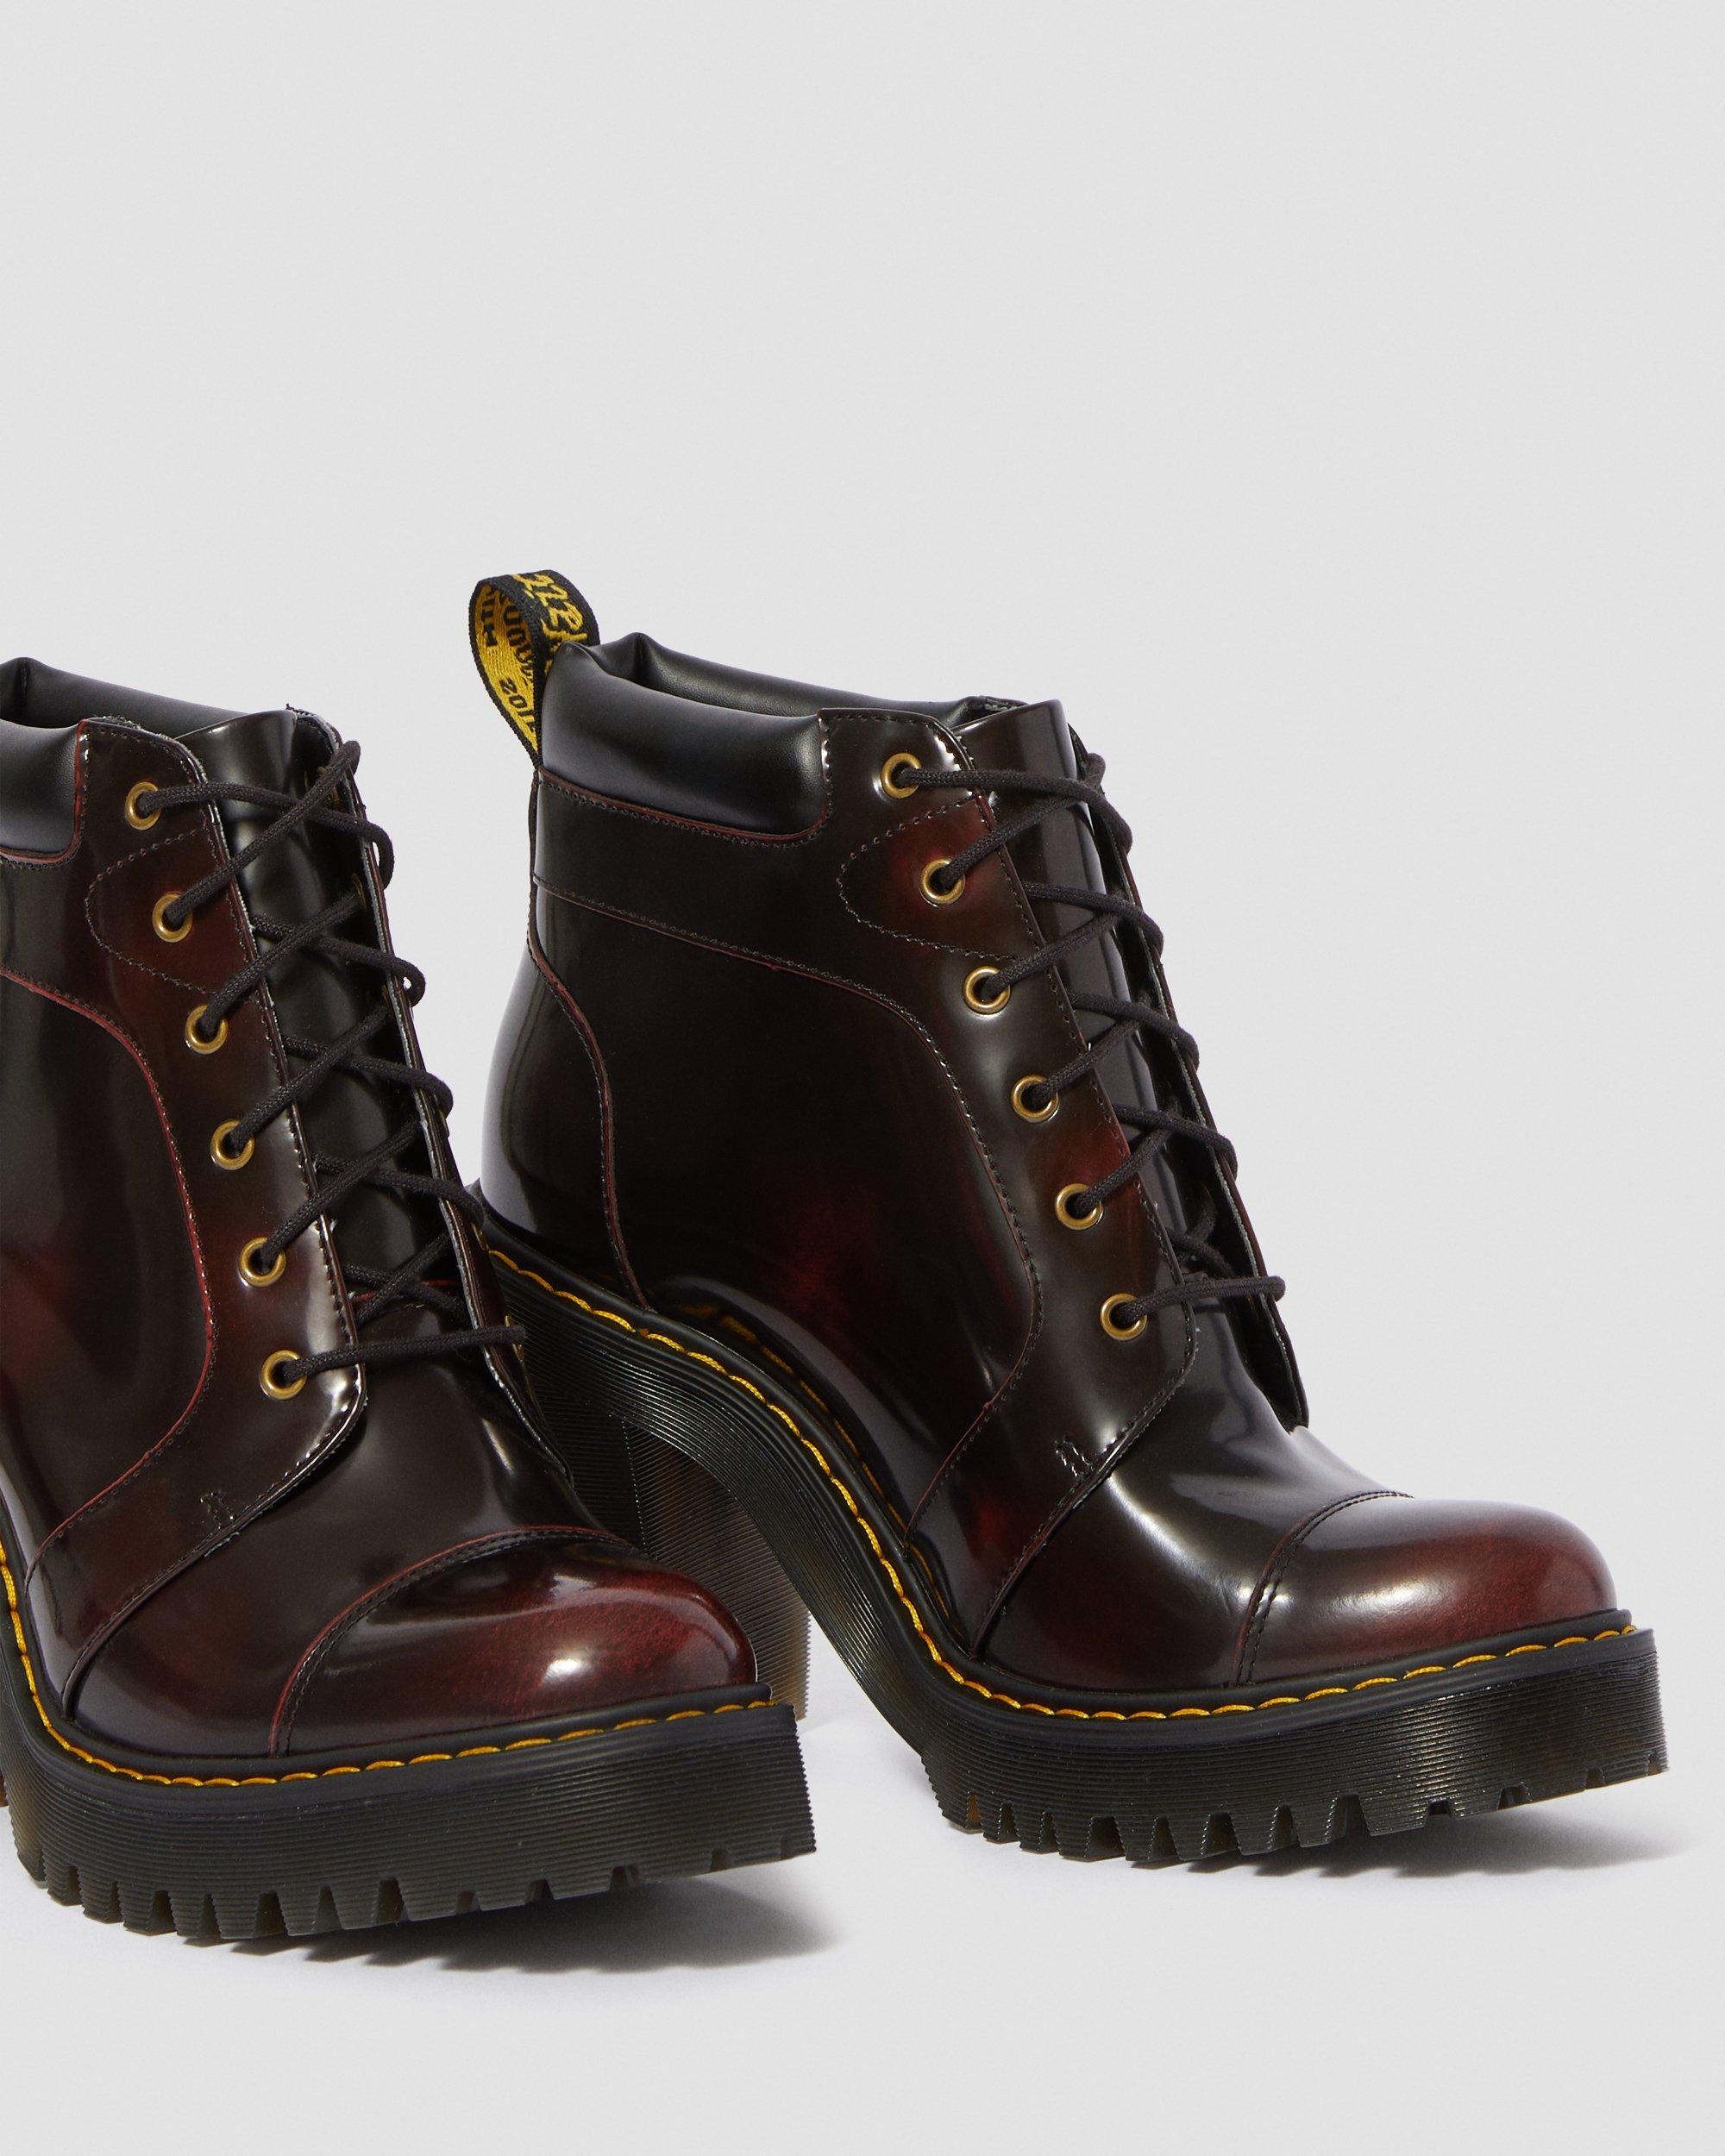 AVERIL LEATHER HEELED ANKLE BOOTS Dr. Martens